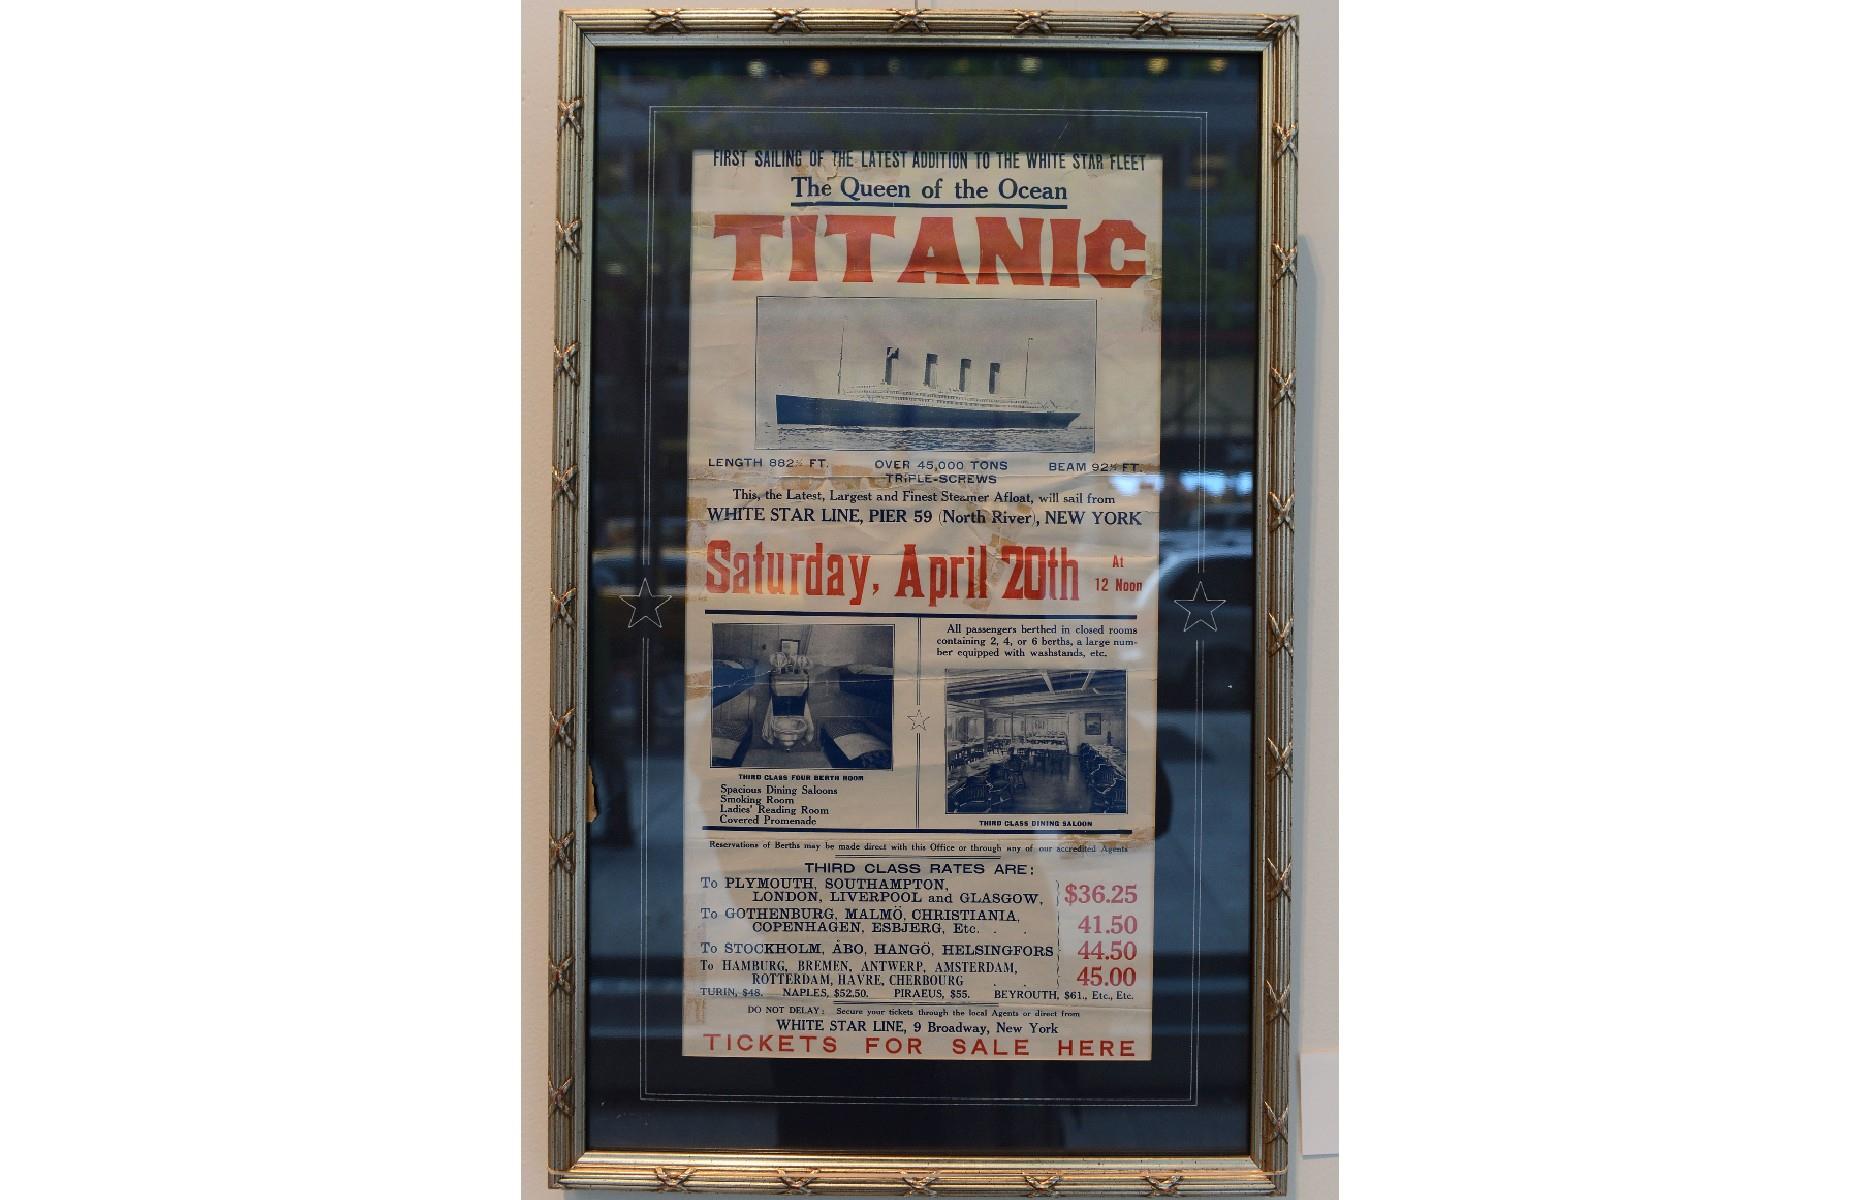 <p>The Titanic’s maiden voyage was due to start in Southampton, and stop off at Cherbourg, France and Queenstown, Ireland, before reaching New York. The journey was scheduled to be a return trip that would also see passengers board in the United States and disembark in France or England. Of course, the ill-fated ship never made it to New York, but posters advertising the return journey across the Atlantic were plastered all over the Big Apple. Most of the adverts were destroyed once the Titanic sank, but a few still exist and they are extremely valuable. One creased but intact copy sold at British auction house Henry Aldridge and Son for £62,000 ($85.2k) in 2018.</p>